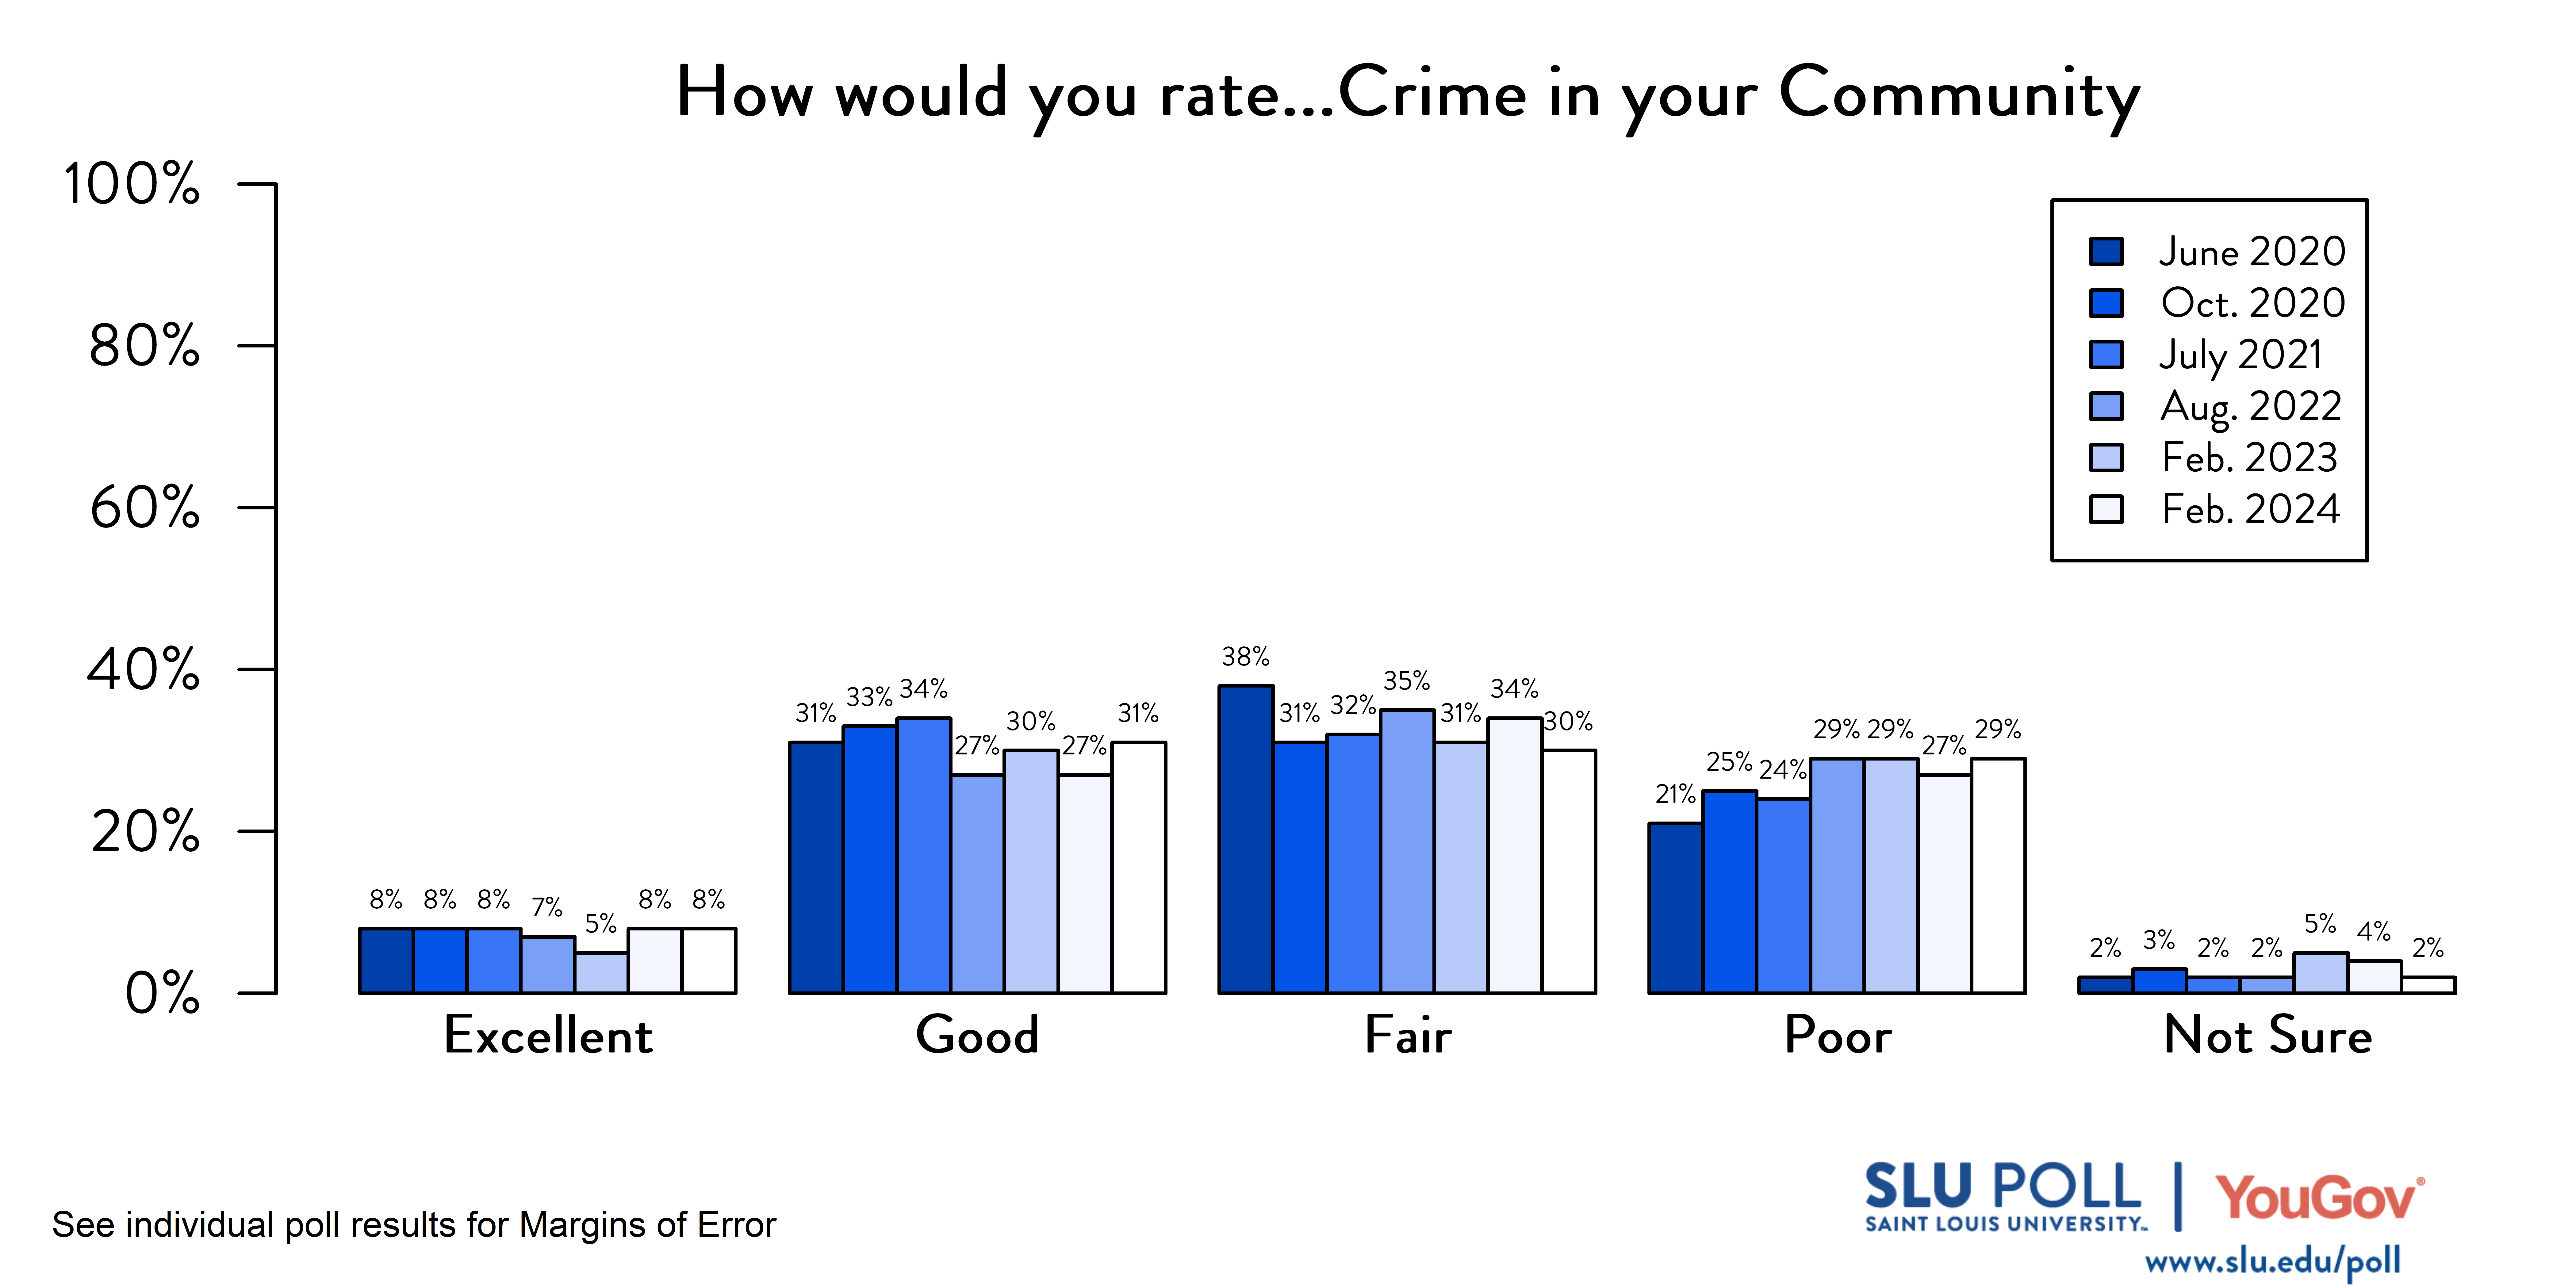 Likely voters' responses to 'How would you rate the condition of the following…Crime in your community?'. June 2020 Voter Responses 8% Excellent, 31% Good, 38% Fair, 21% Poor, and 2% Not Sure. October 2020 Voter Responses: 8% Excellent, 33% Good, 31% Fair, 25% Poor, and 3% Not sure. July 2021 Voter Responses: 8% Excellent, 34% Good, 32% Fair, 24% Poor, and 2% Not sure. August 2022 Voter Responses: 7% Excellent, 27% Good, 35% Fair, 29% Poor, and 2% Not sure. February 2023 Voter Responses: 5% Excellent, 30% Good, 31% Fair, 29% Poor, and 5% Not sure. February 2024 Voter Responses: 8% Excellent, 31% Good, 30% Fair, 29% Poor, and 2% Not sure.